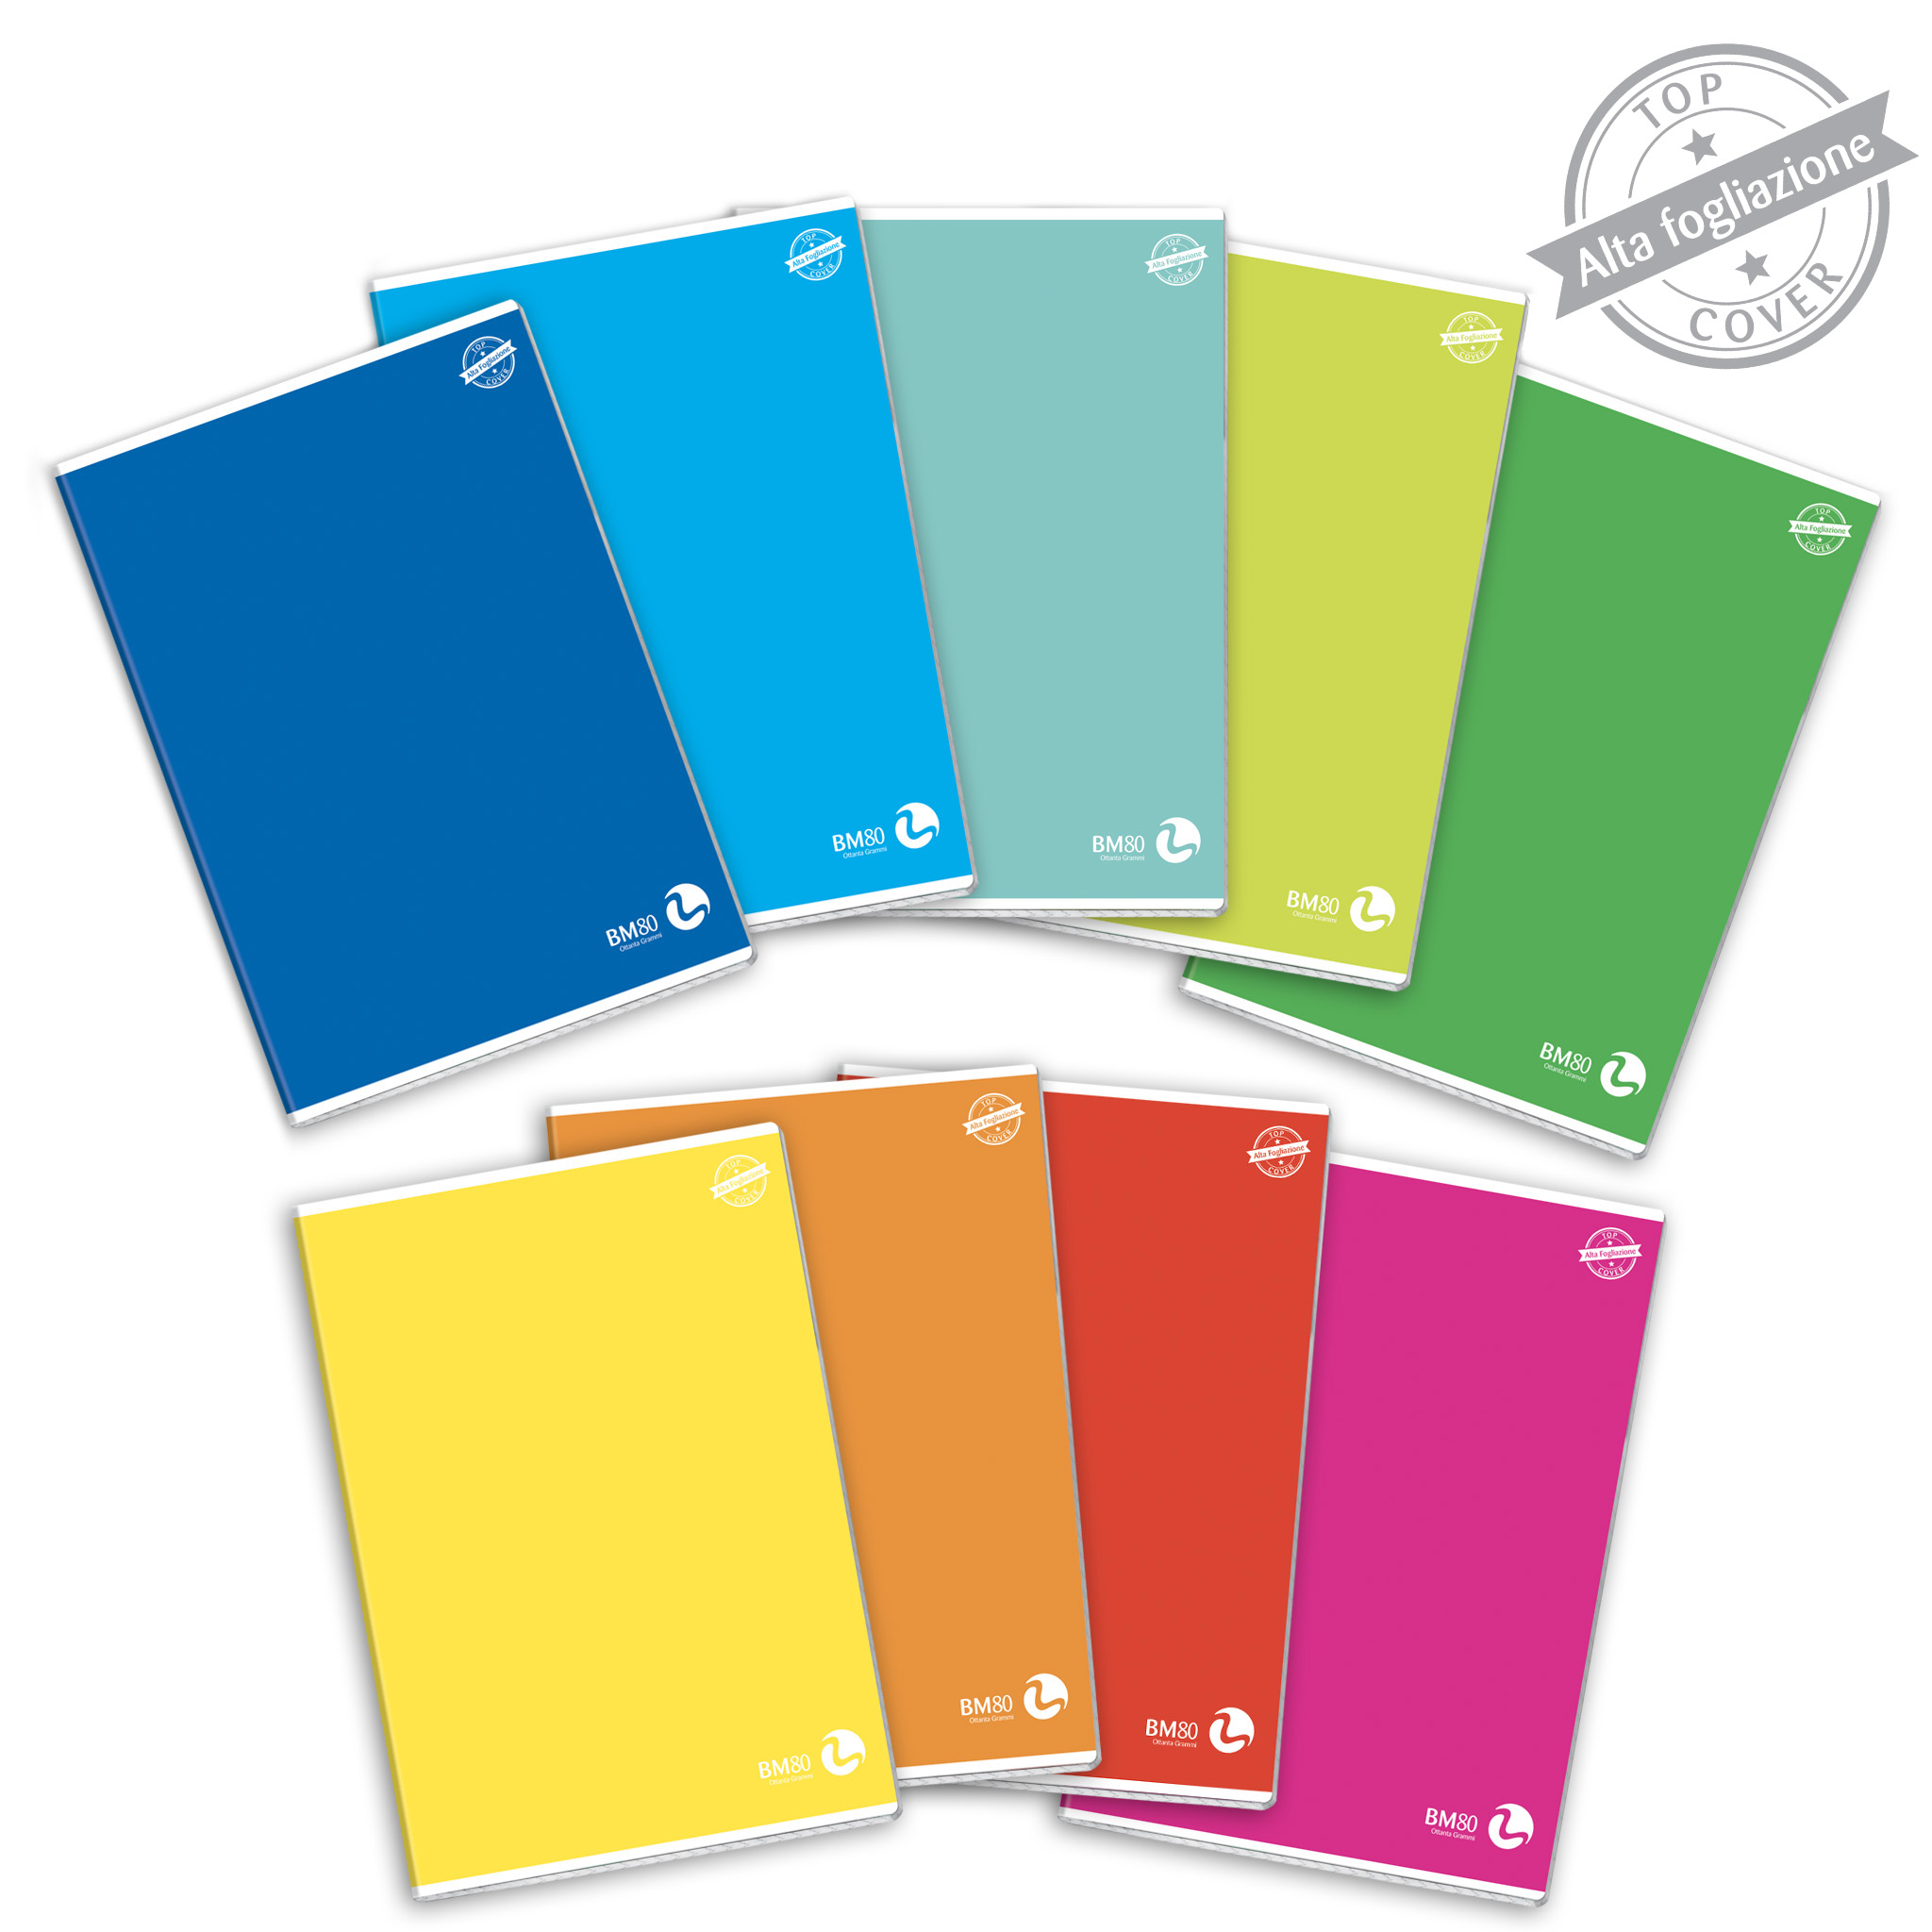 A4 maxi notebooks TOP COVER 80 high pagination - 10 assorted pieces